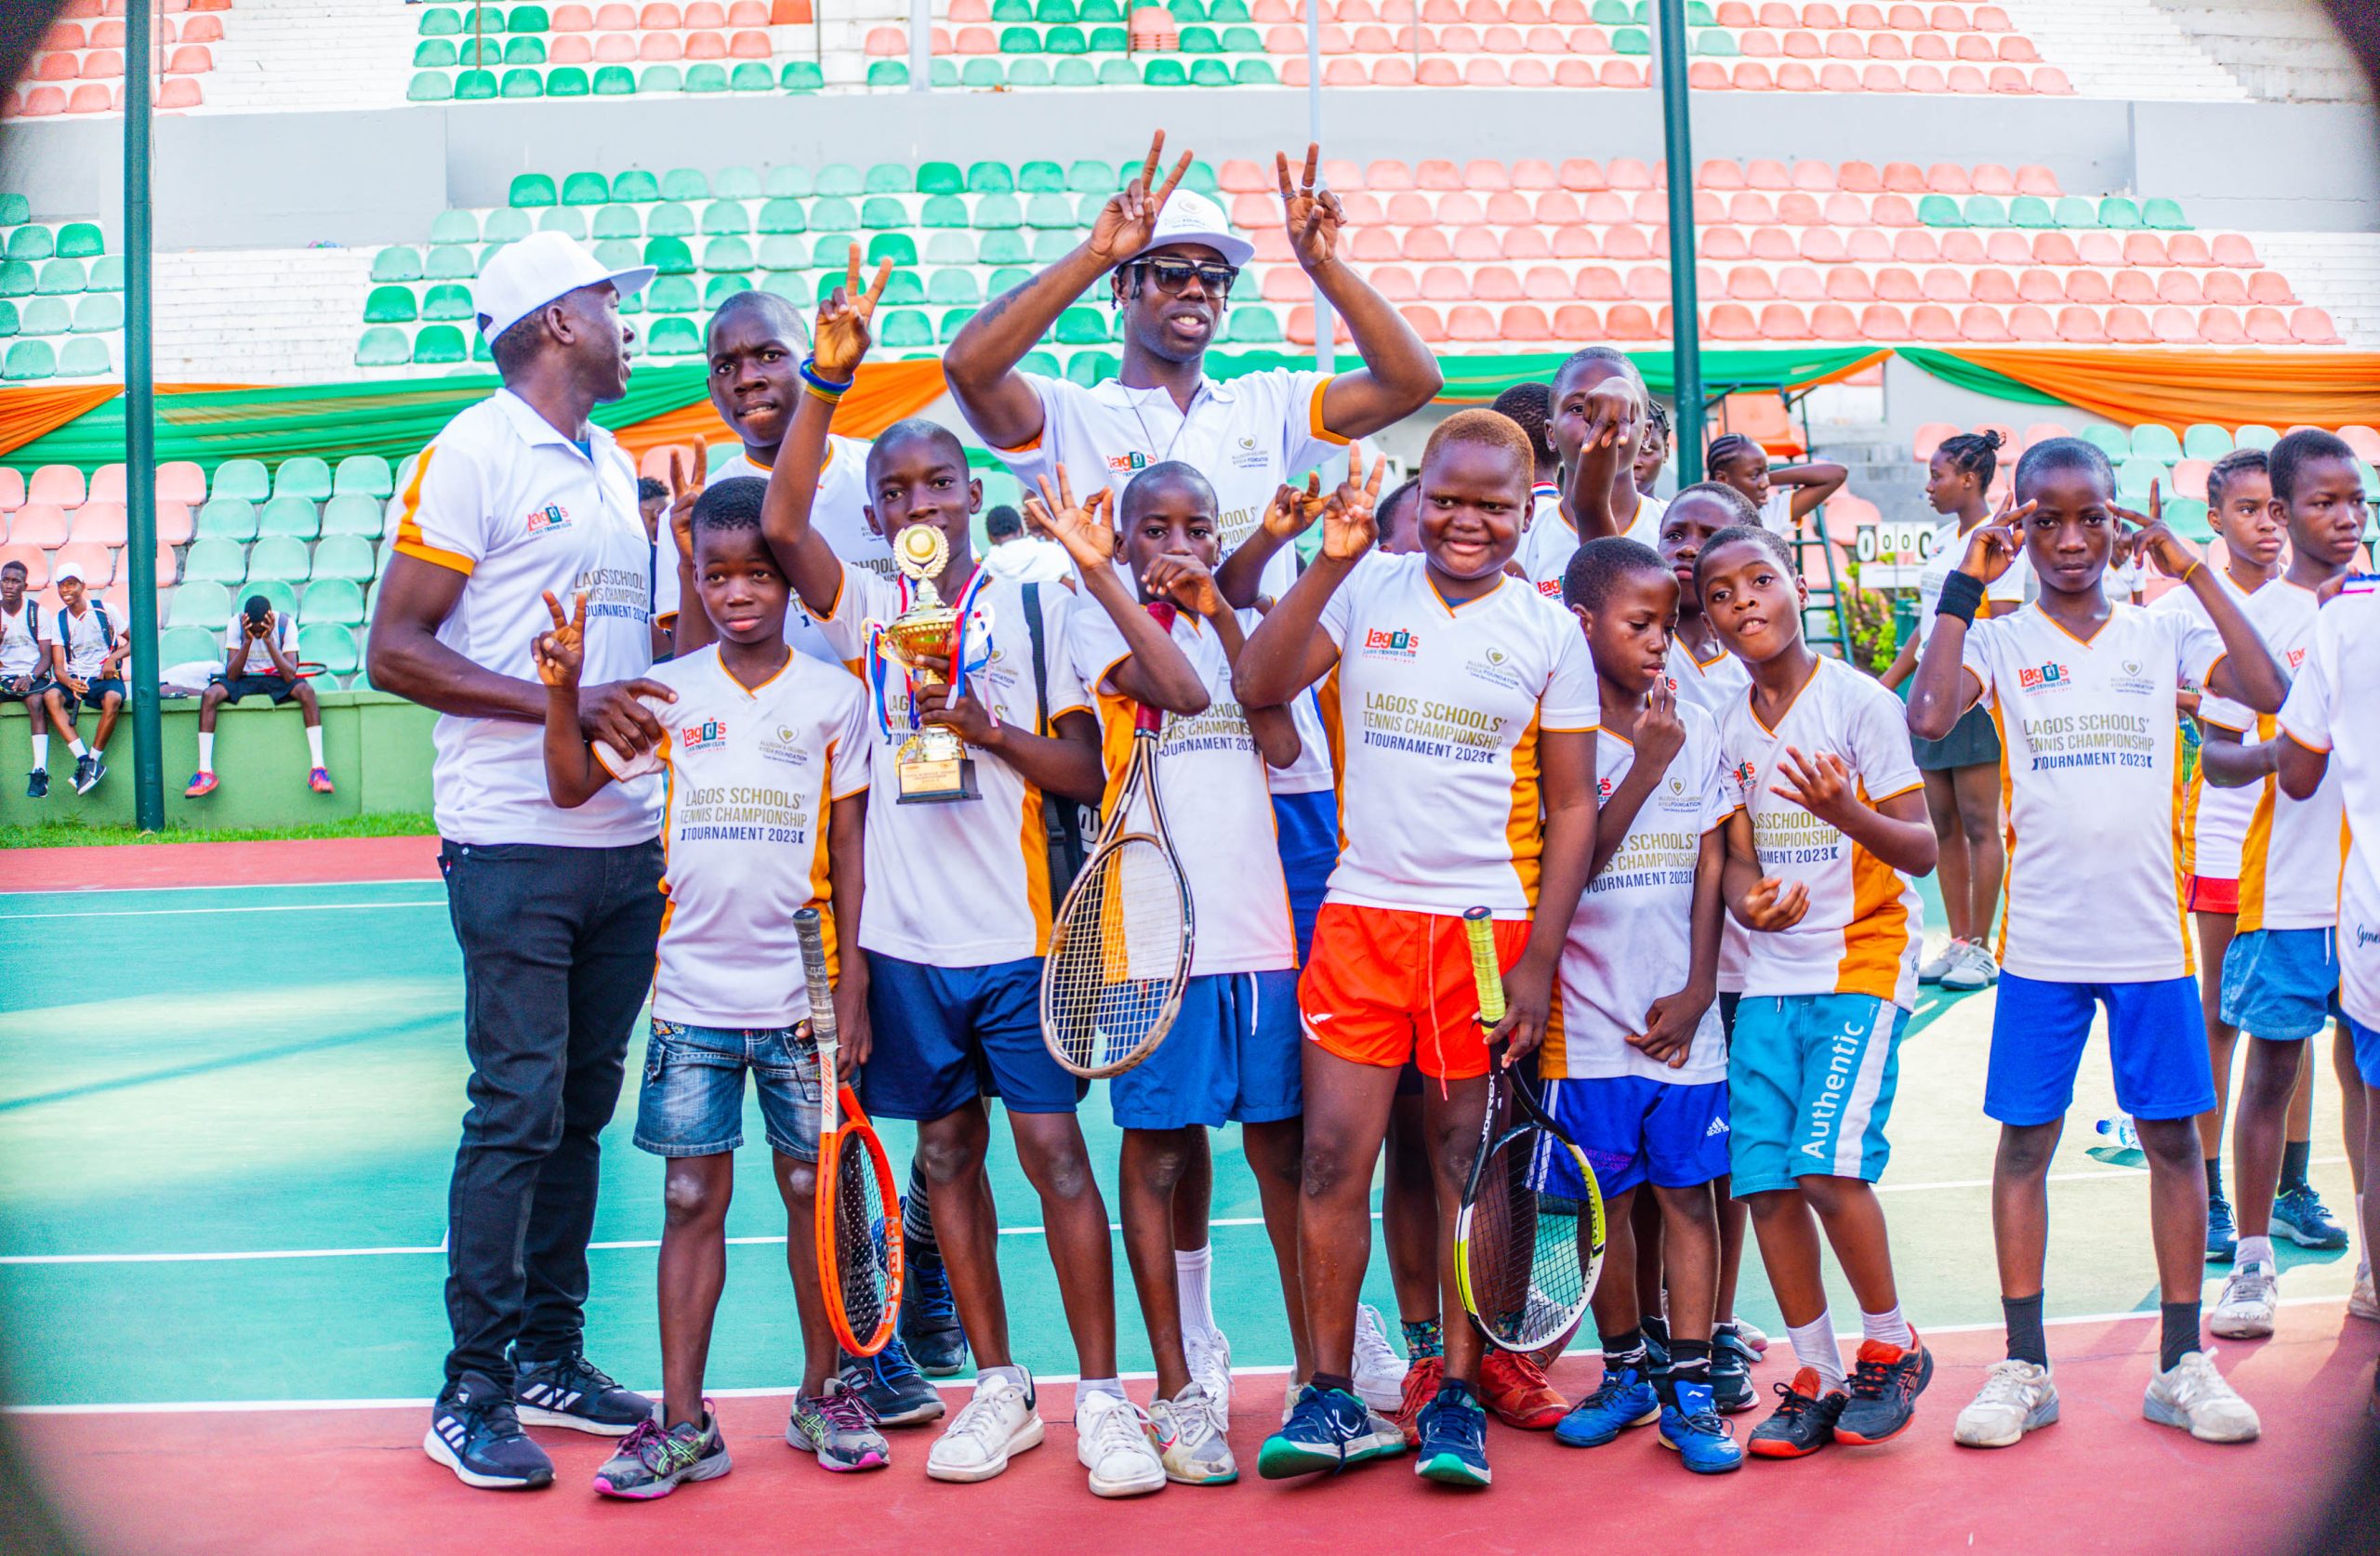 Reliving The Lagos Schools’ Tennis Championship Through The Lens